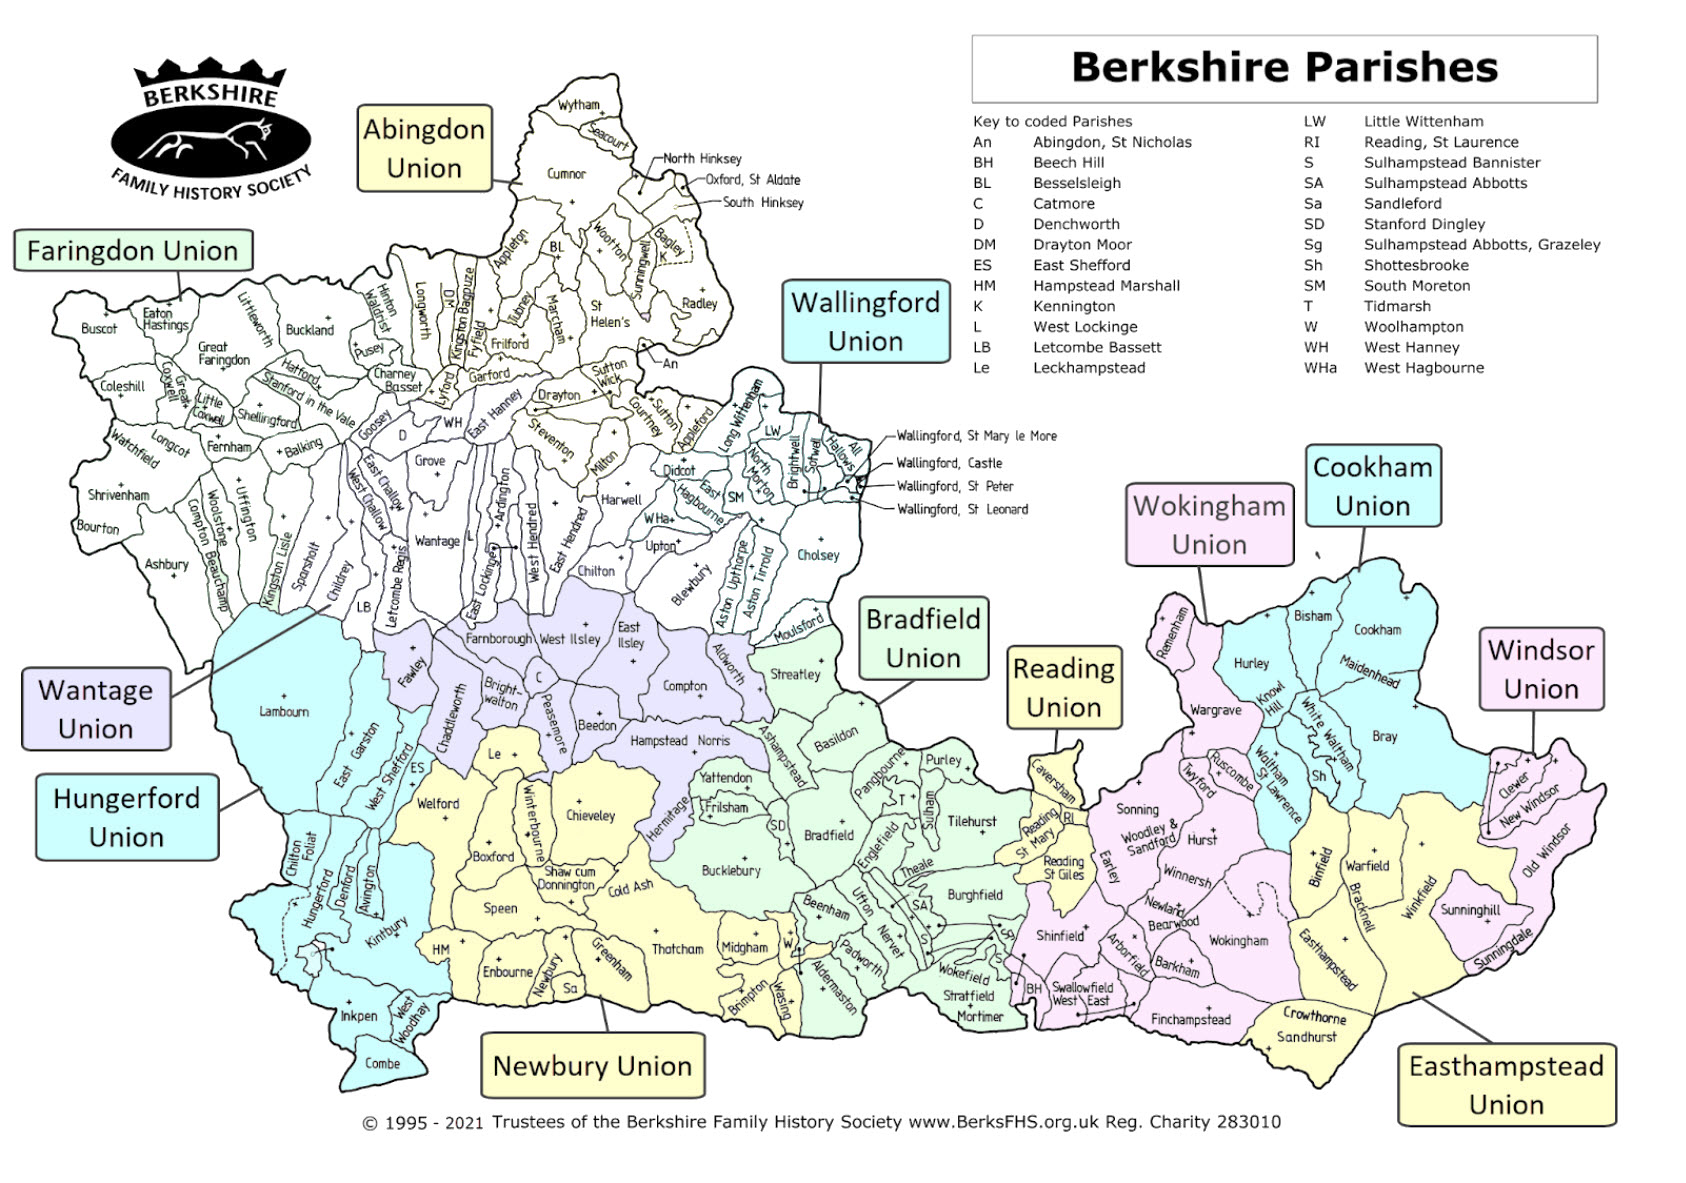 Map of Berkshire after the 1974 Boundary Changes